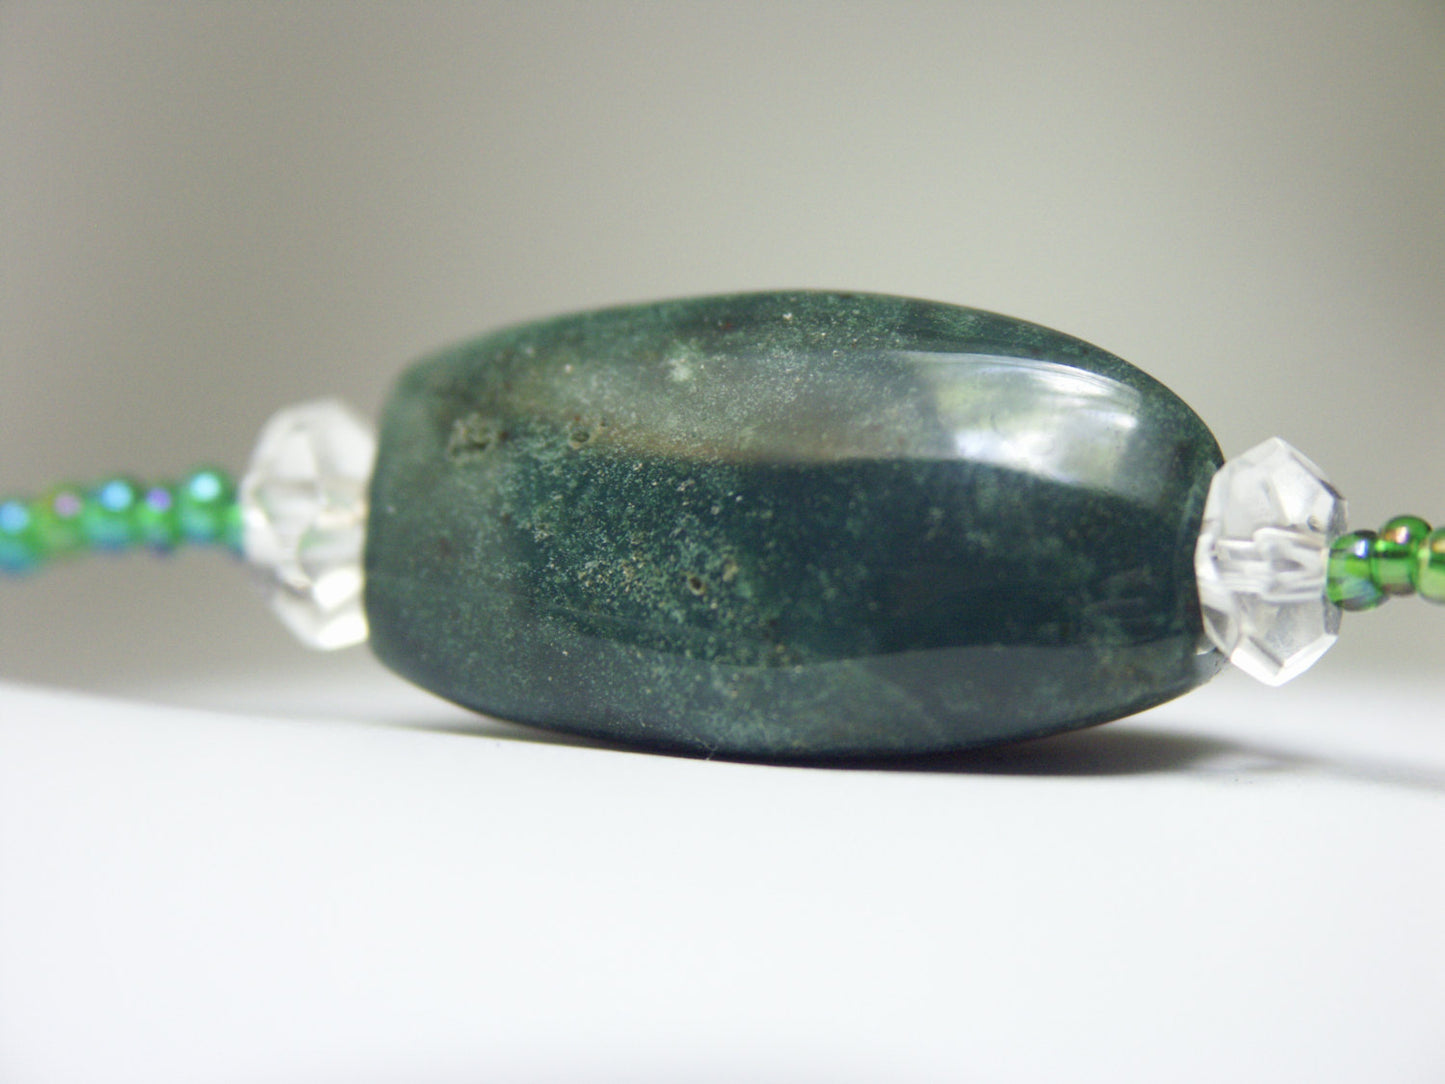 Green Agate and Quartz Necklace - One-of-a-Kind